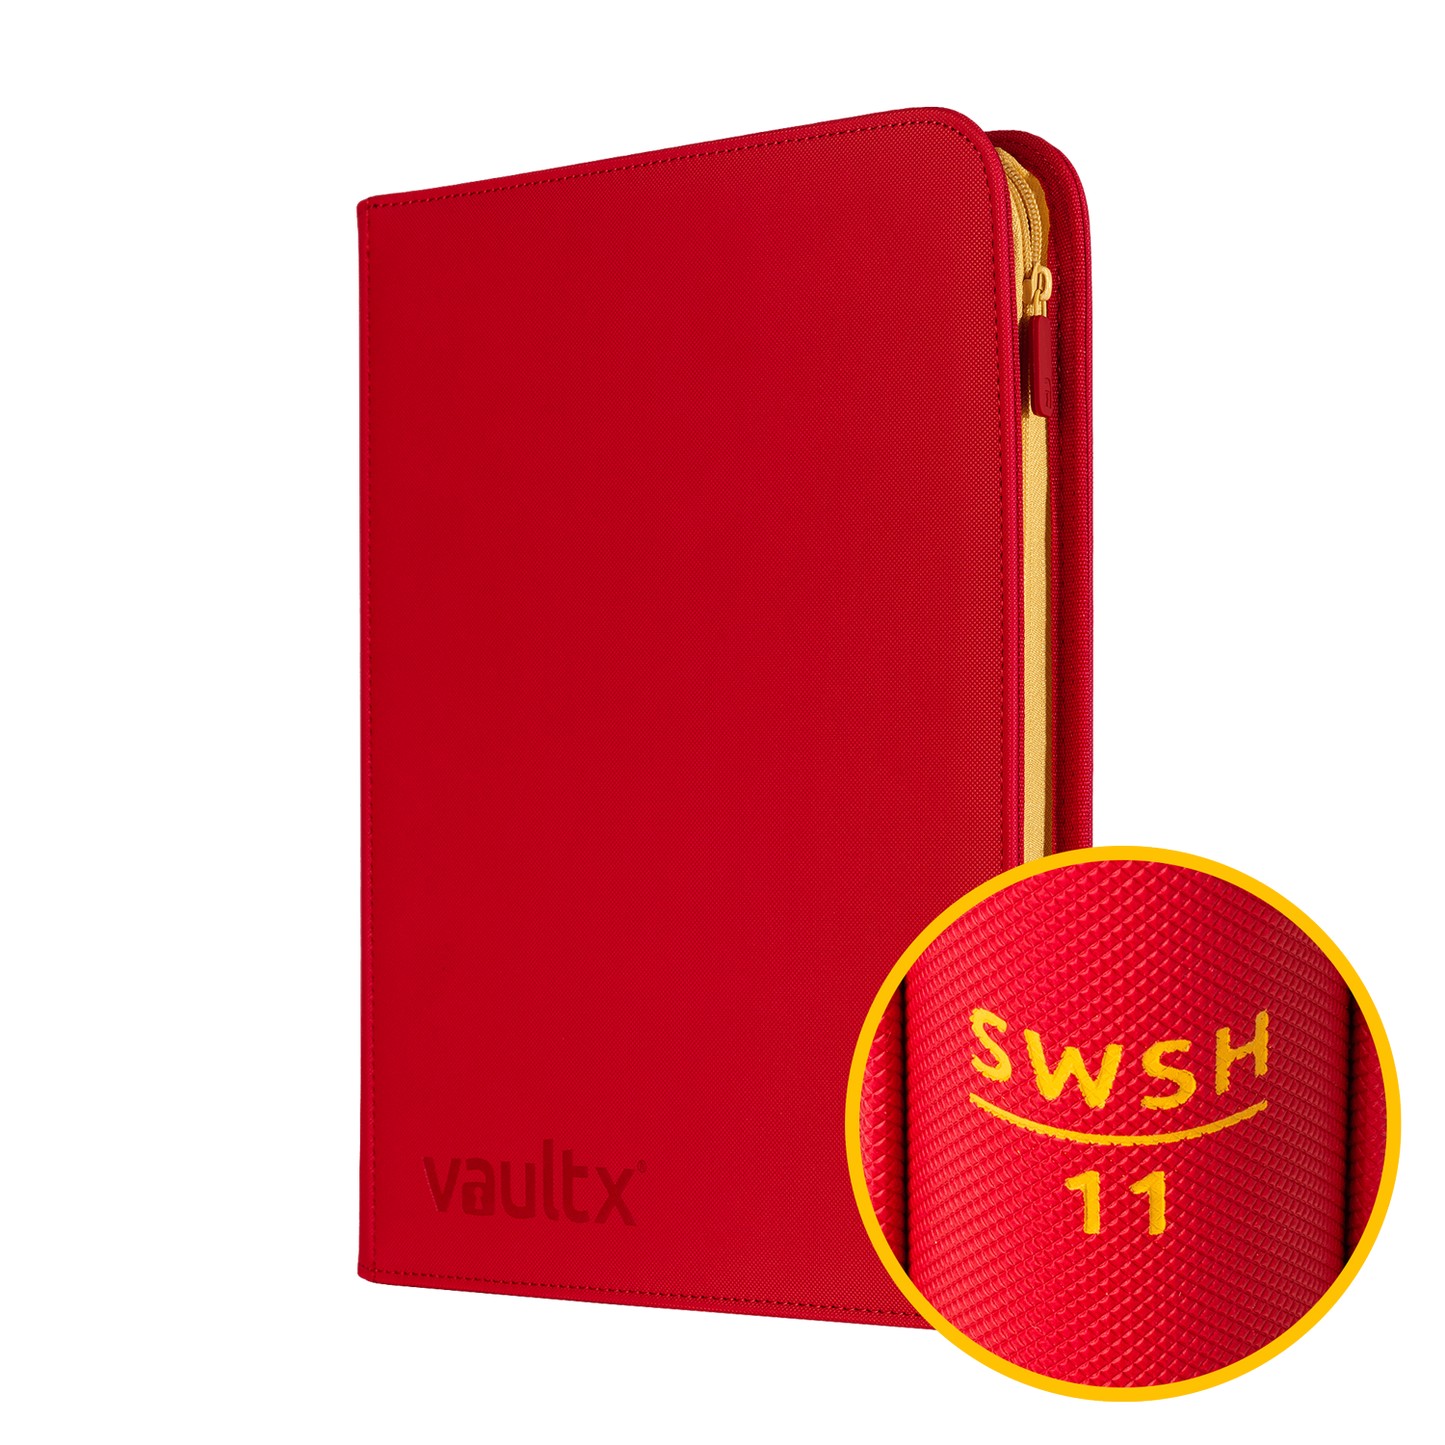 Vault X - SWSH9 Brilliant Stars Exclusive Binder now available to